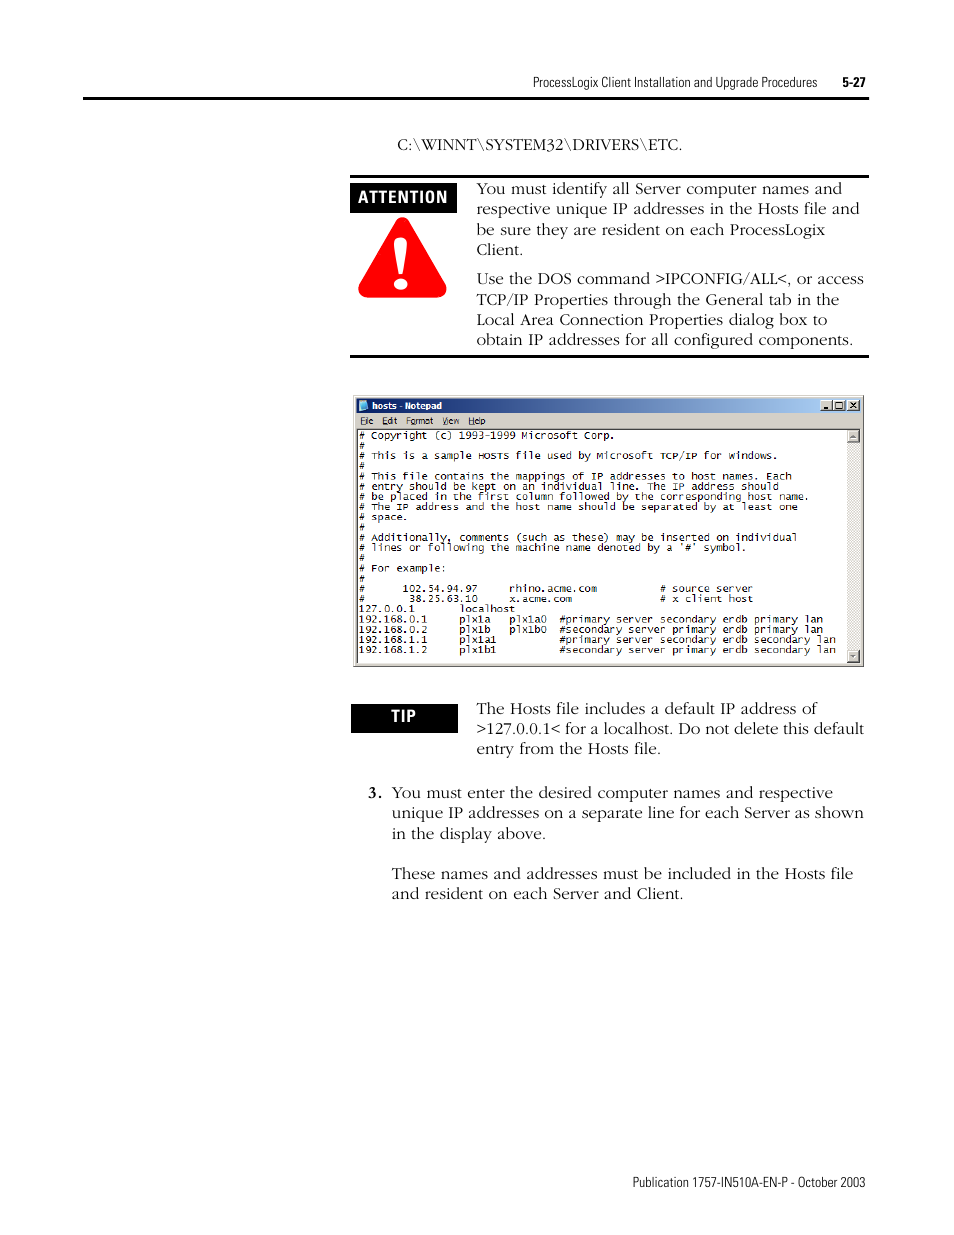 Rockwell Automation 1757-SWKIT5100 ProcessLogix R510.0 Installation and Upgrade Guide User Manual | Page 153 / 271